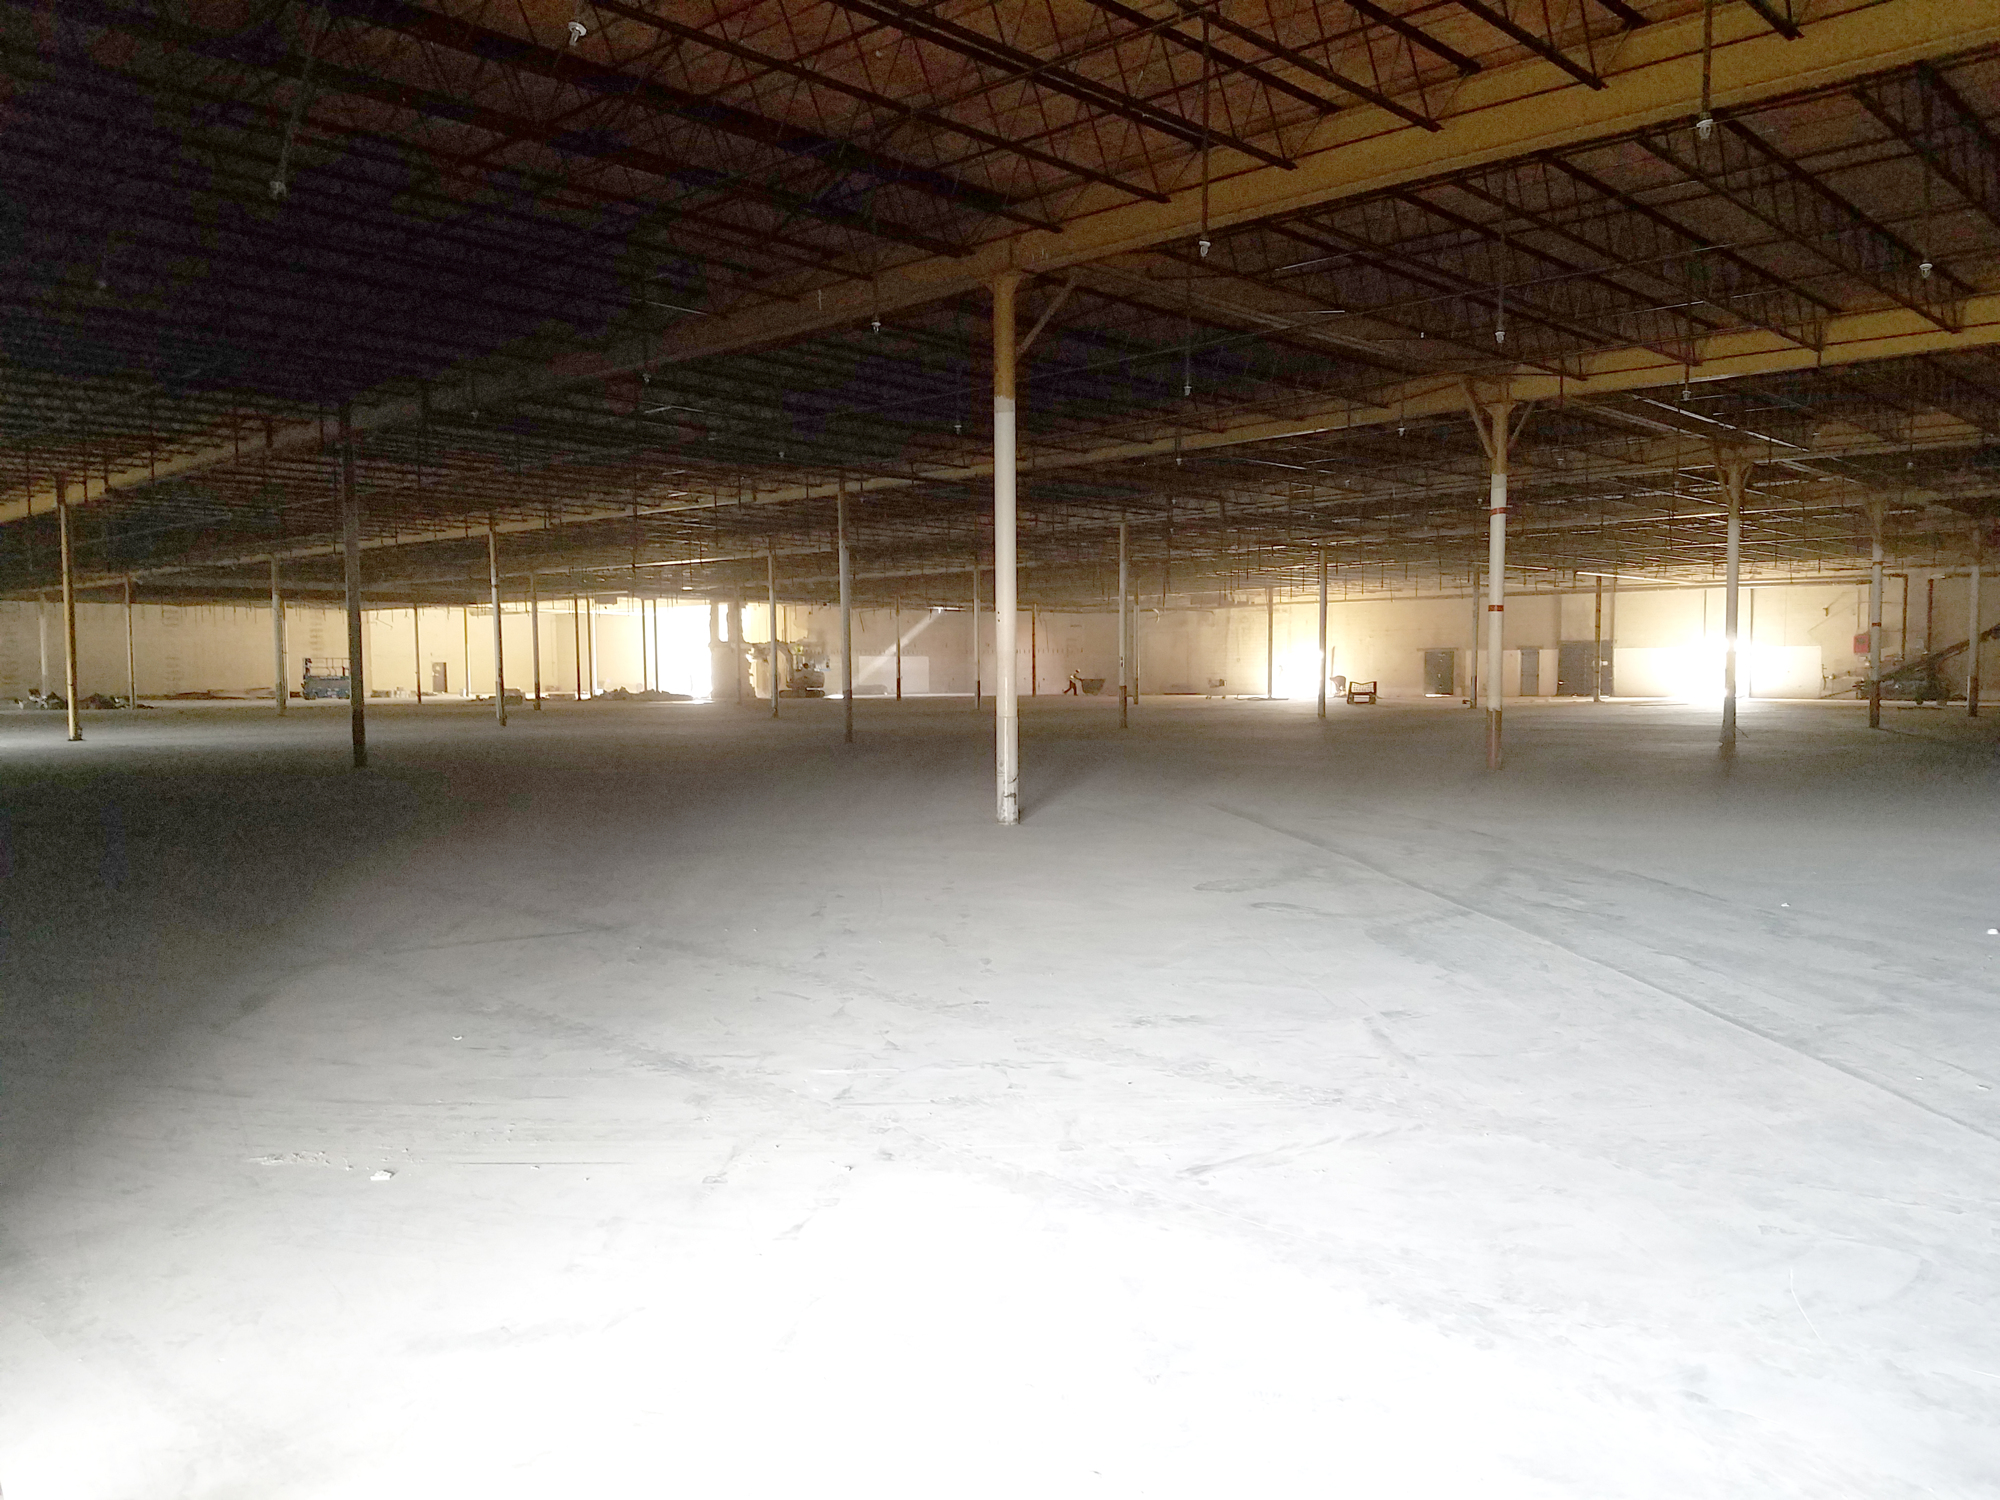 Work was being done inside the former Kmart at 4645 Blanding Blvd. on Dec. 9